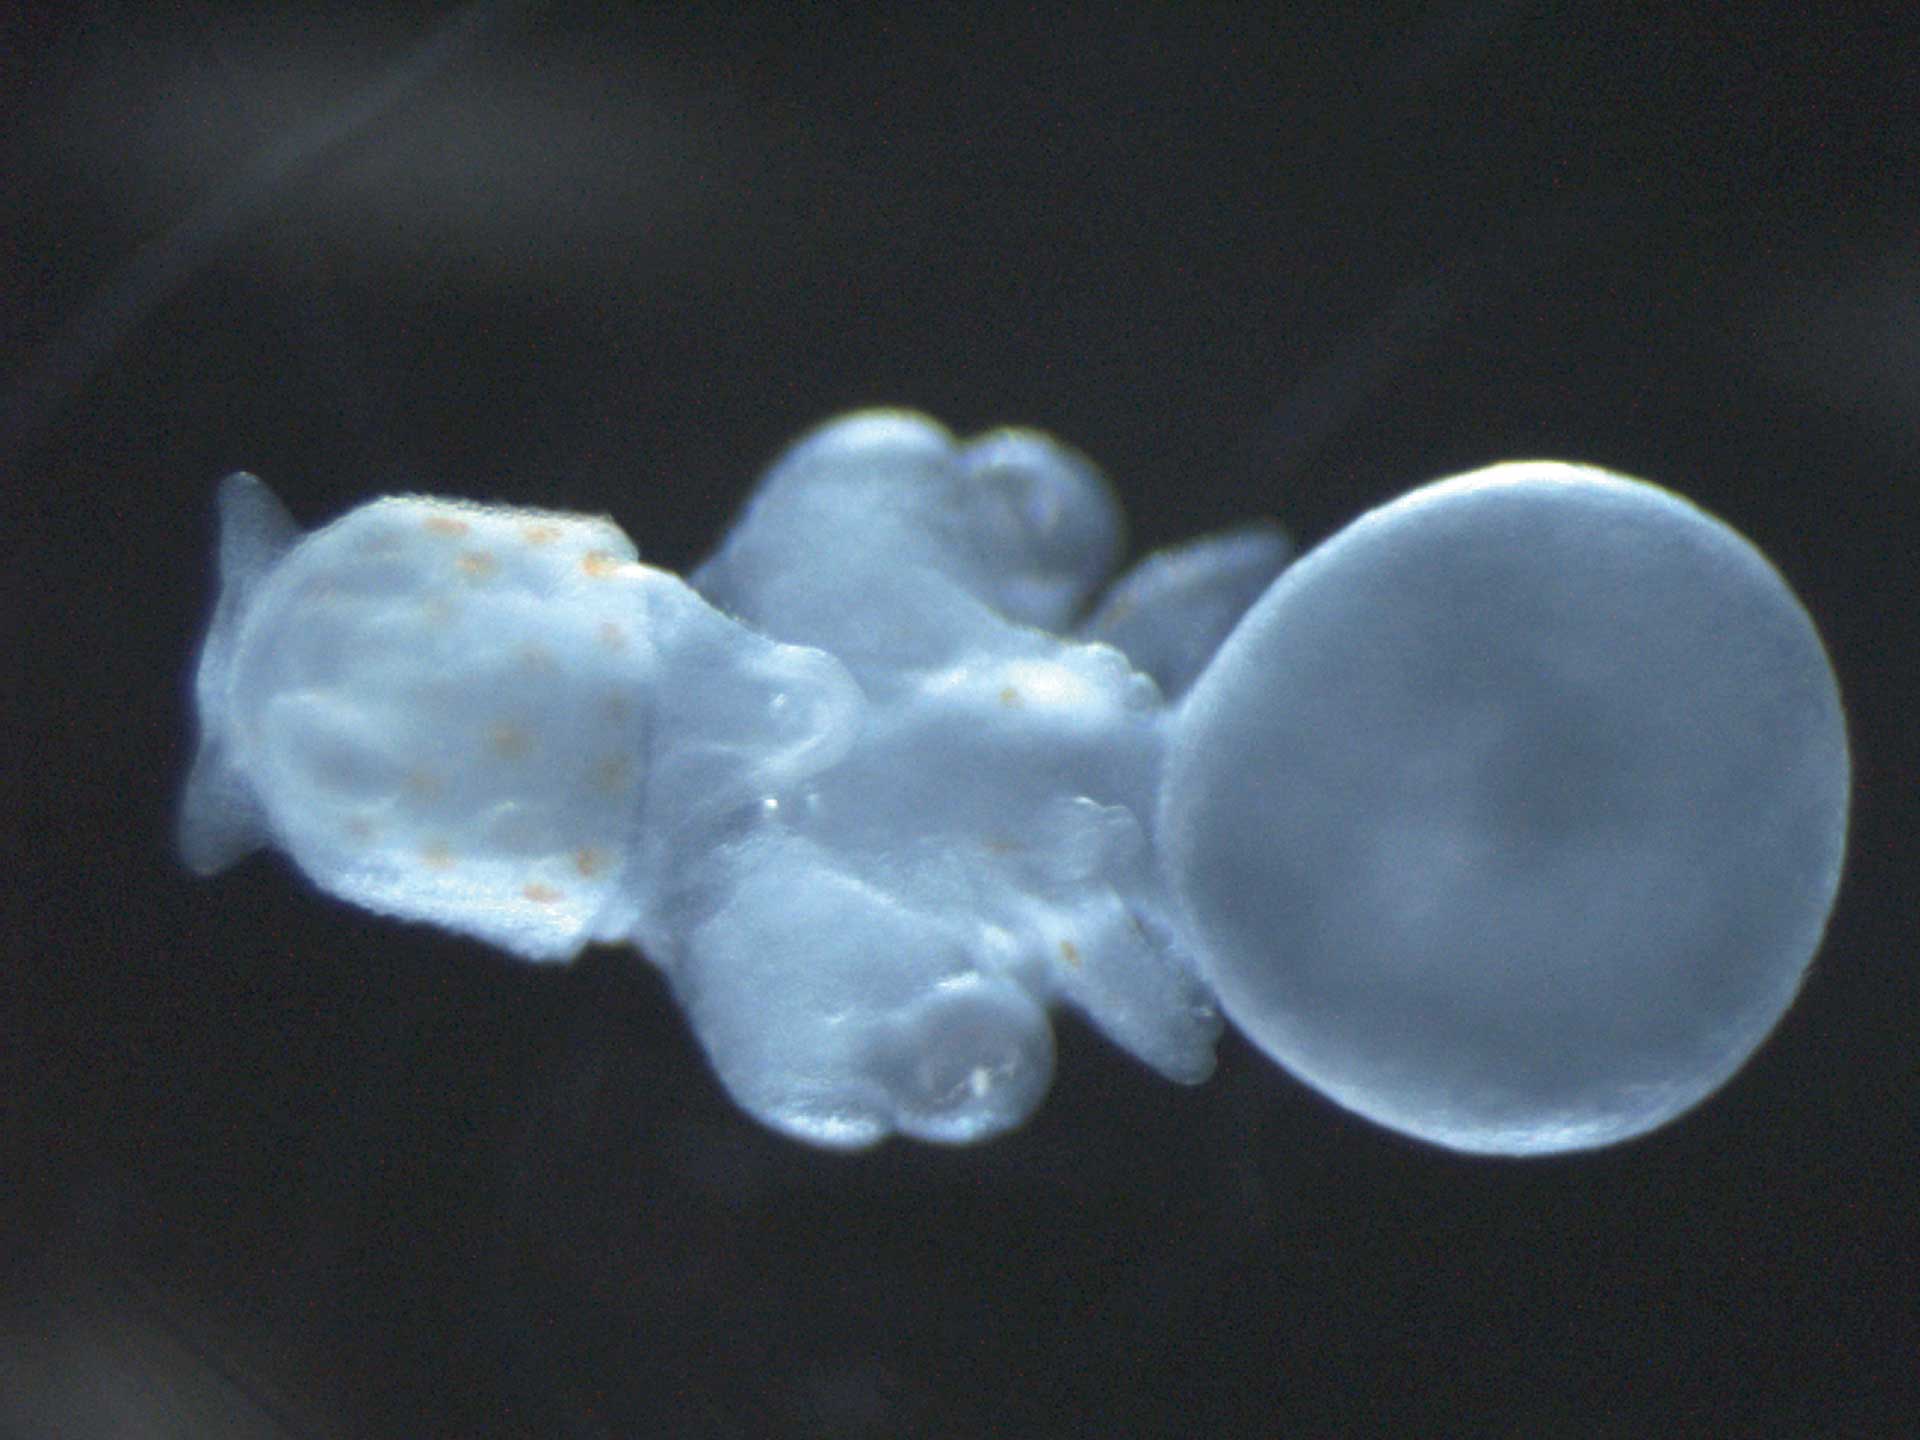 Embryonic stage of a squid Dr. Cassandra Extravour, Department of Organismic and Evolutionary Biology, Cambridge, Massachusetts, USA